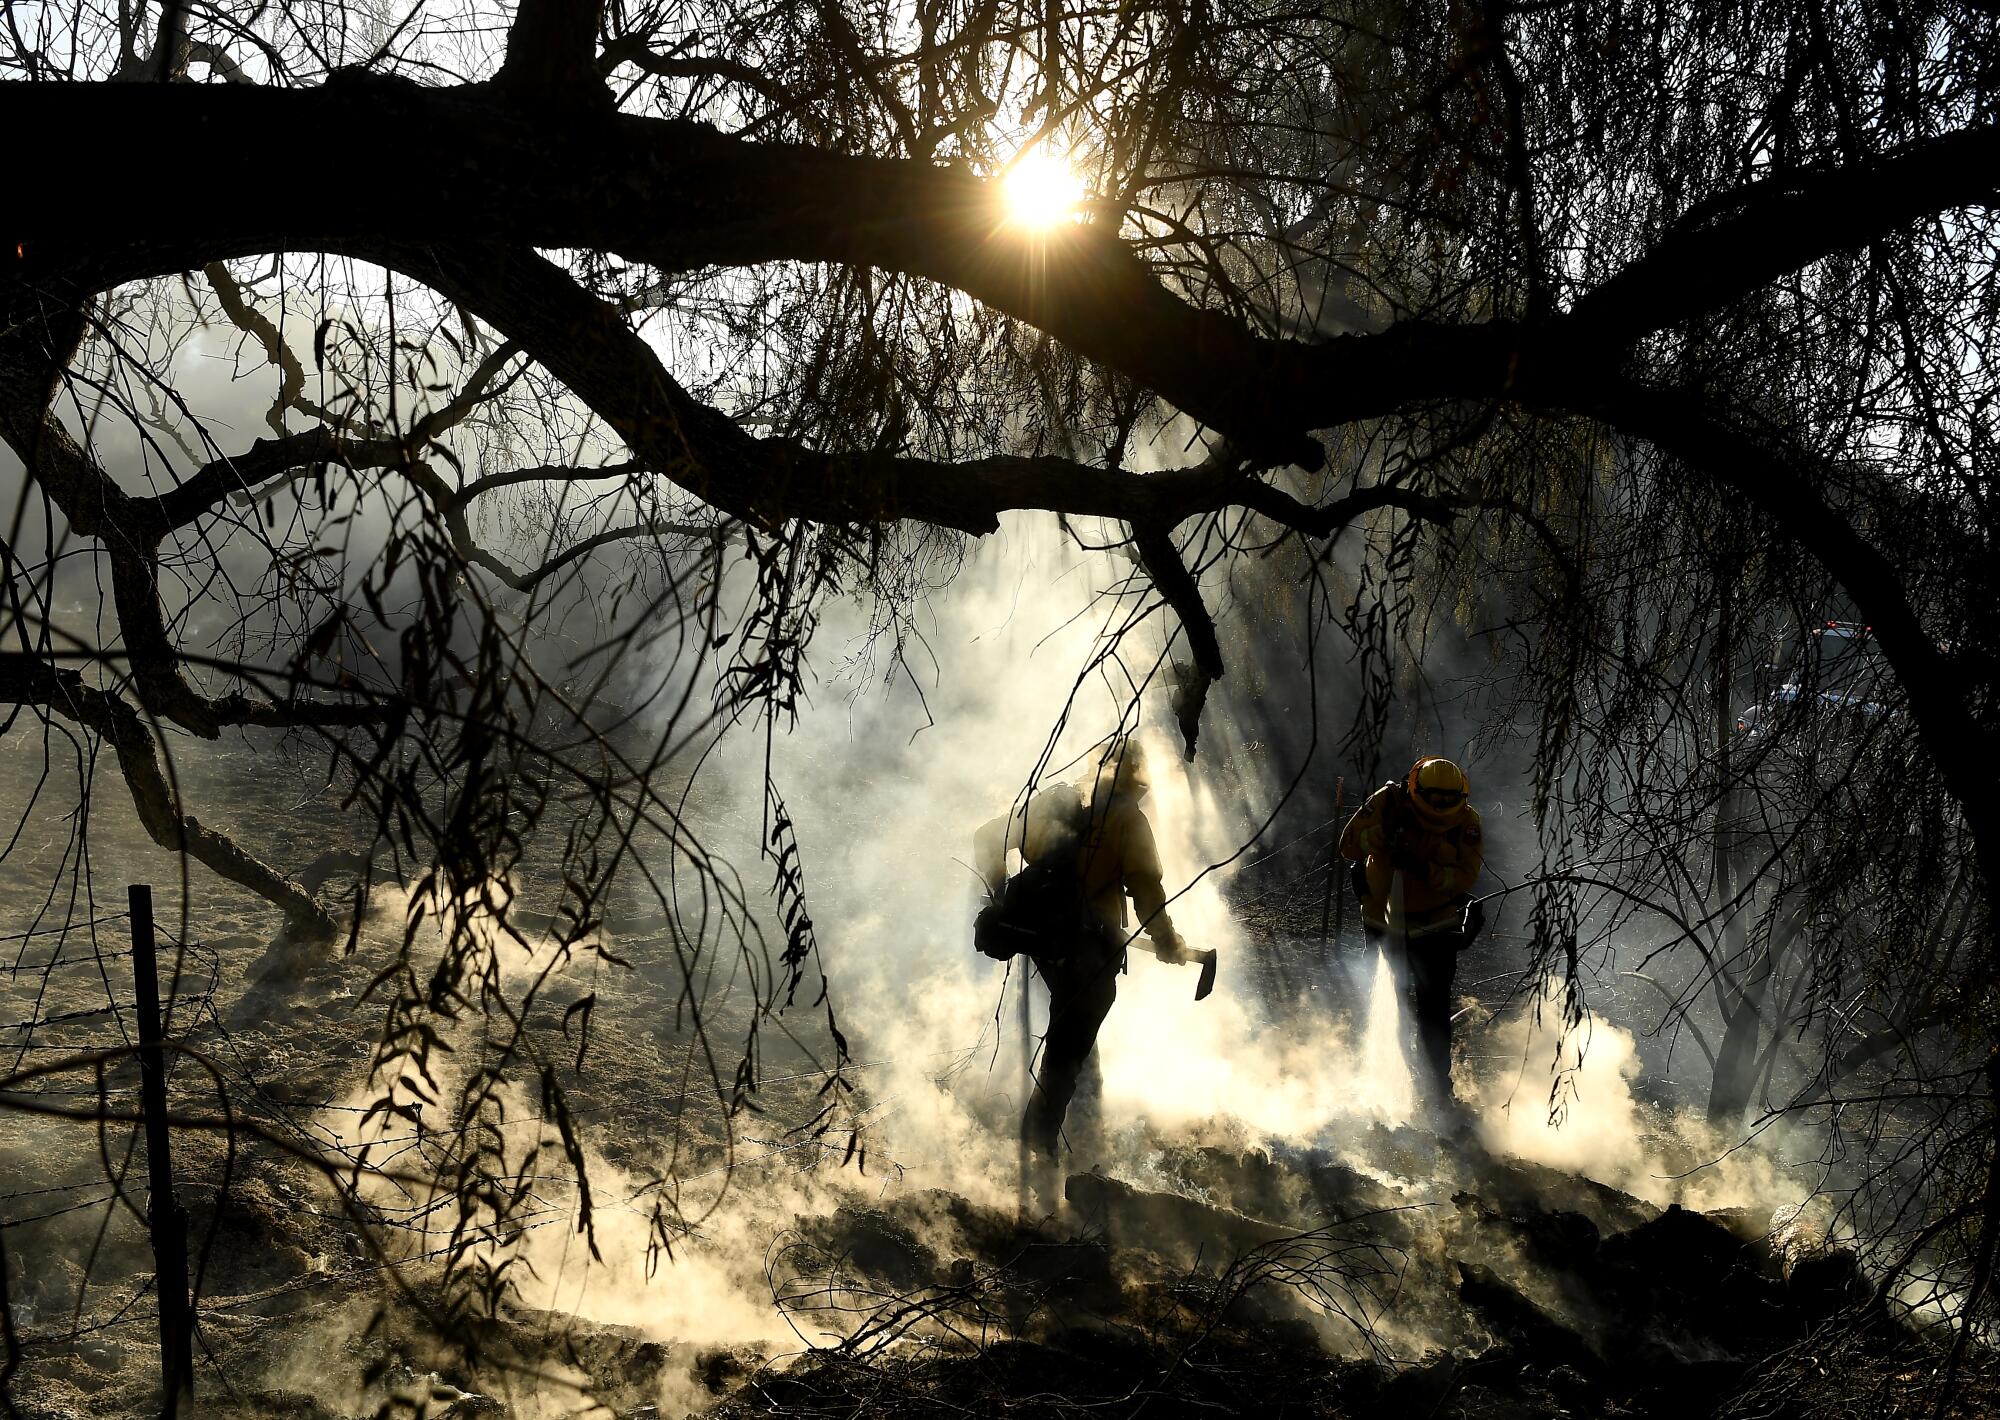 Firefighters carrying hand tools as smoke rises in a wooded area